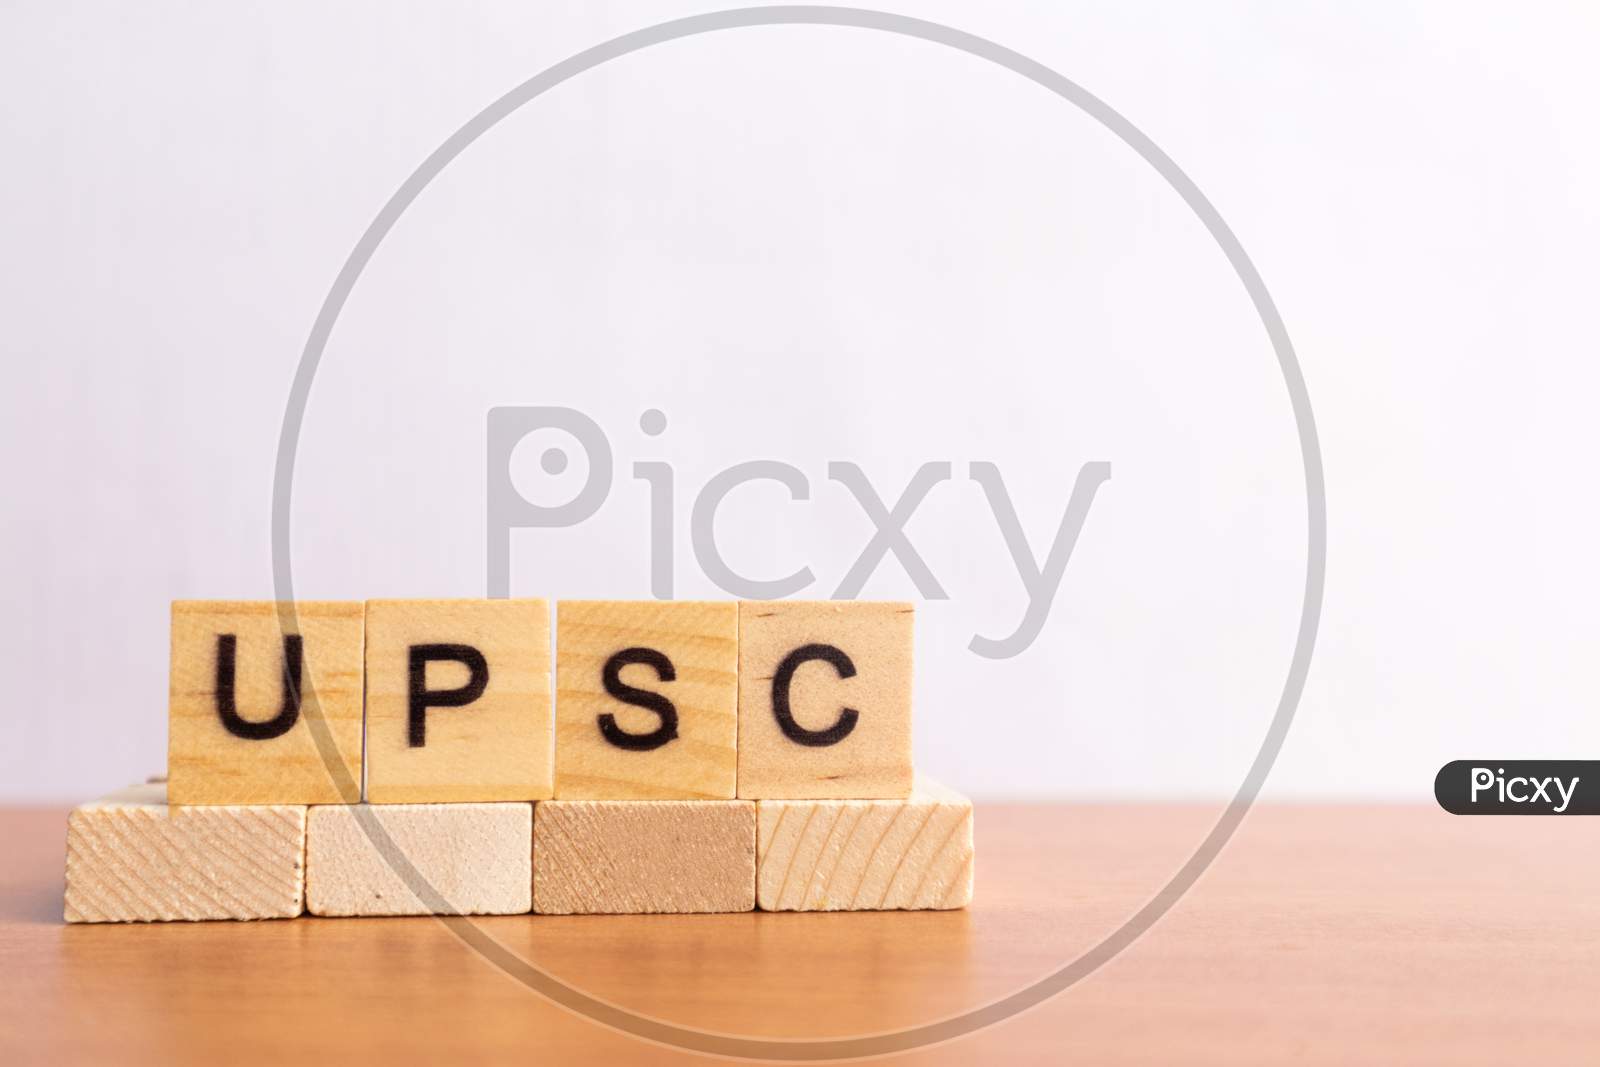 Upsc Or Union Public Service Commission In Wooden Block Letters On Isolated Background